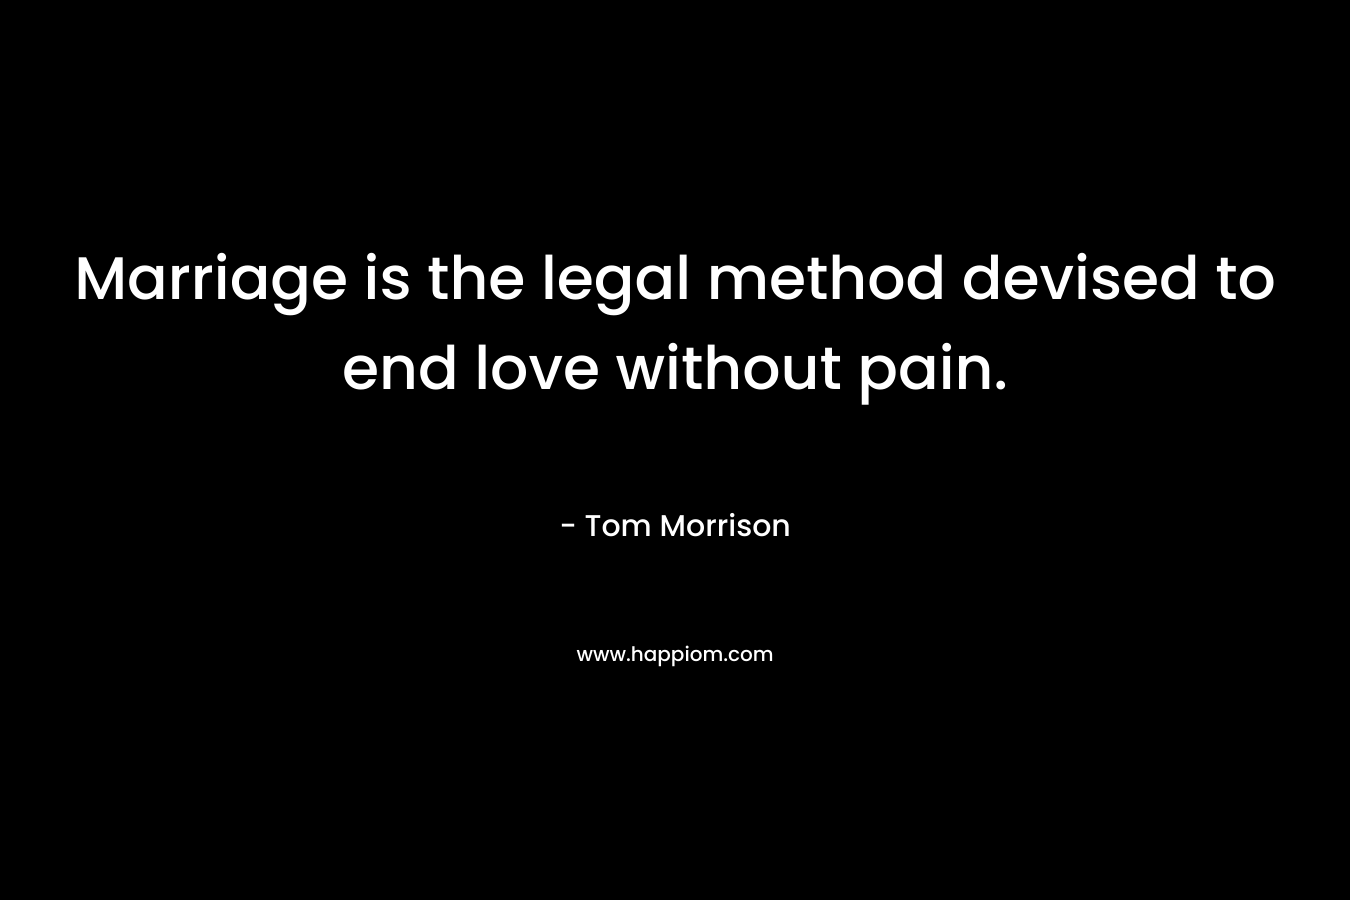 Marriage is the legal method devised to end love without pain. – Tom Morrison